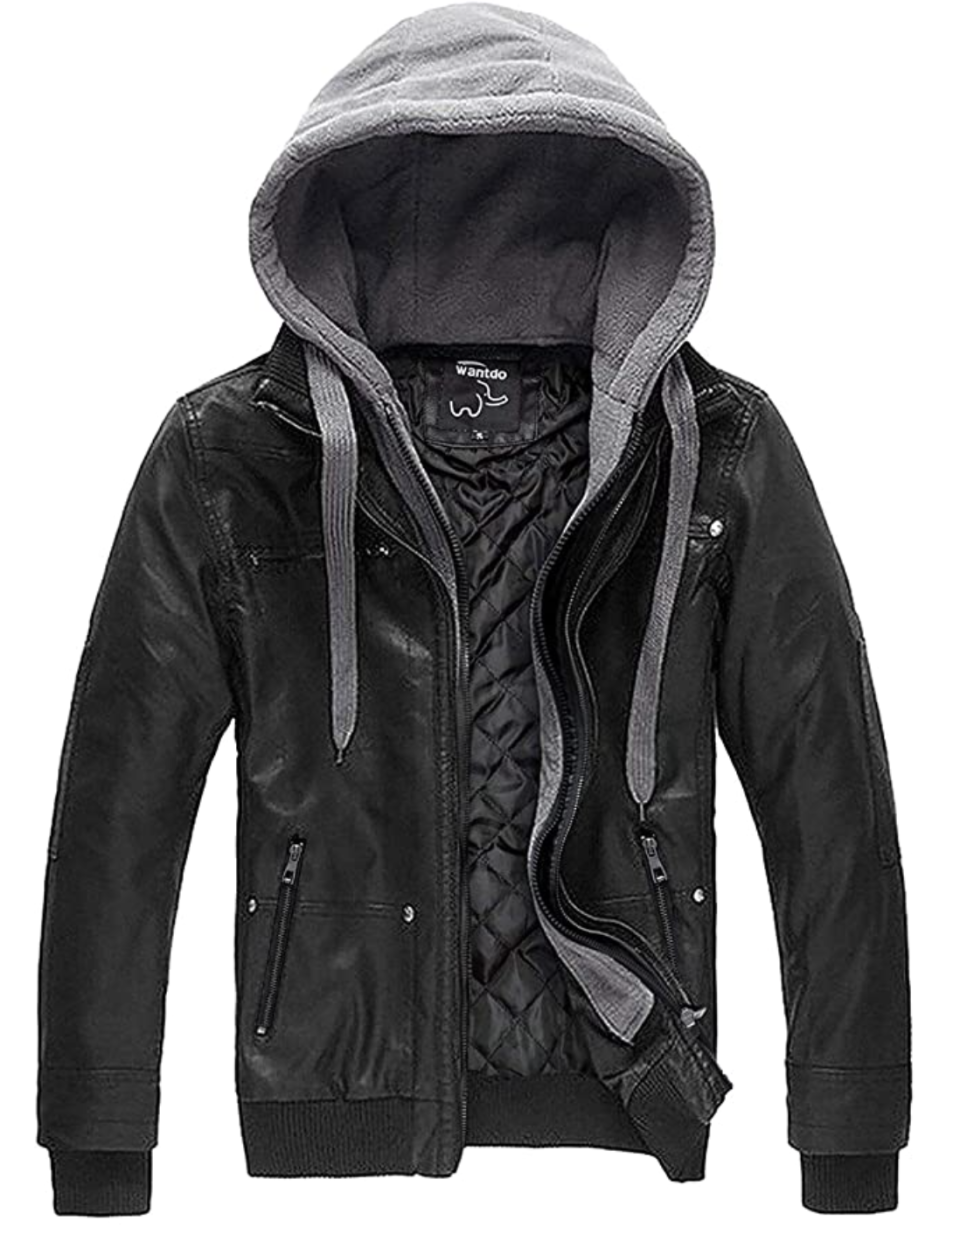 Wantdo Men's Leather Jacket with Removable Hood in black leather (Photo via Amazon)